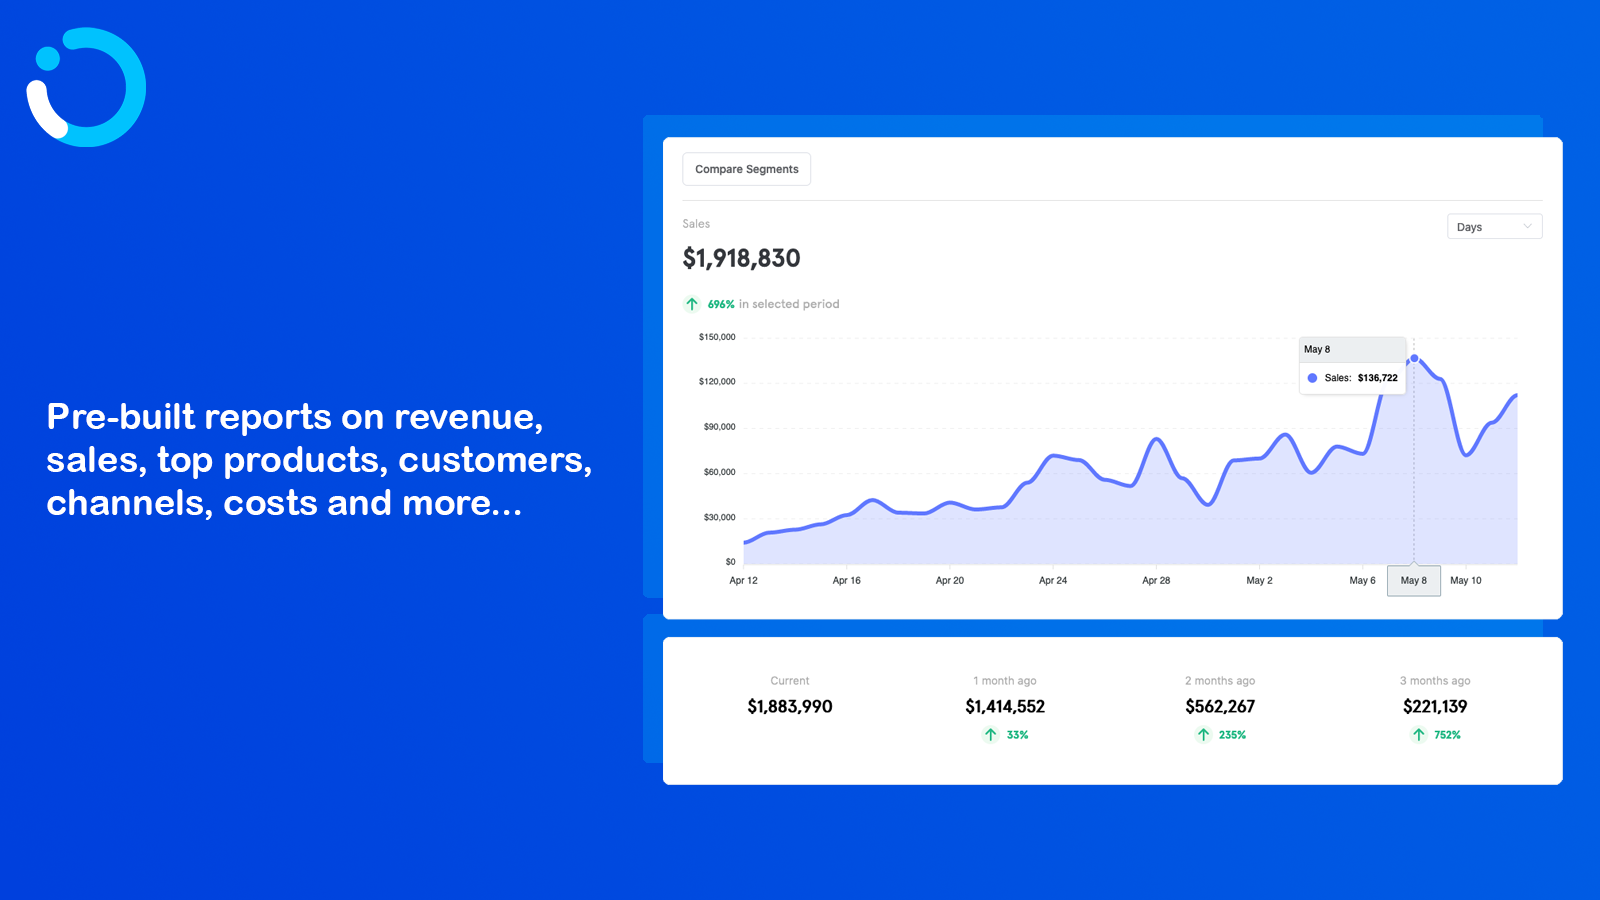 Pre-built reports on revenue, sales, top products, and more...